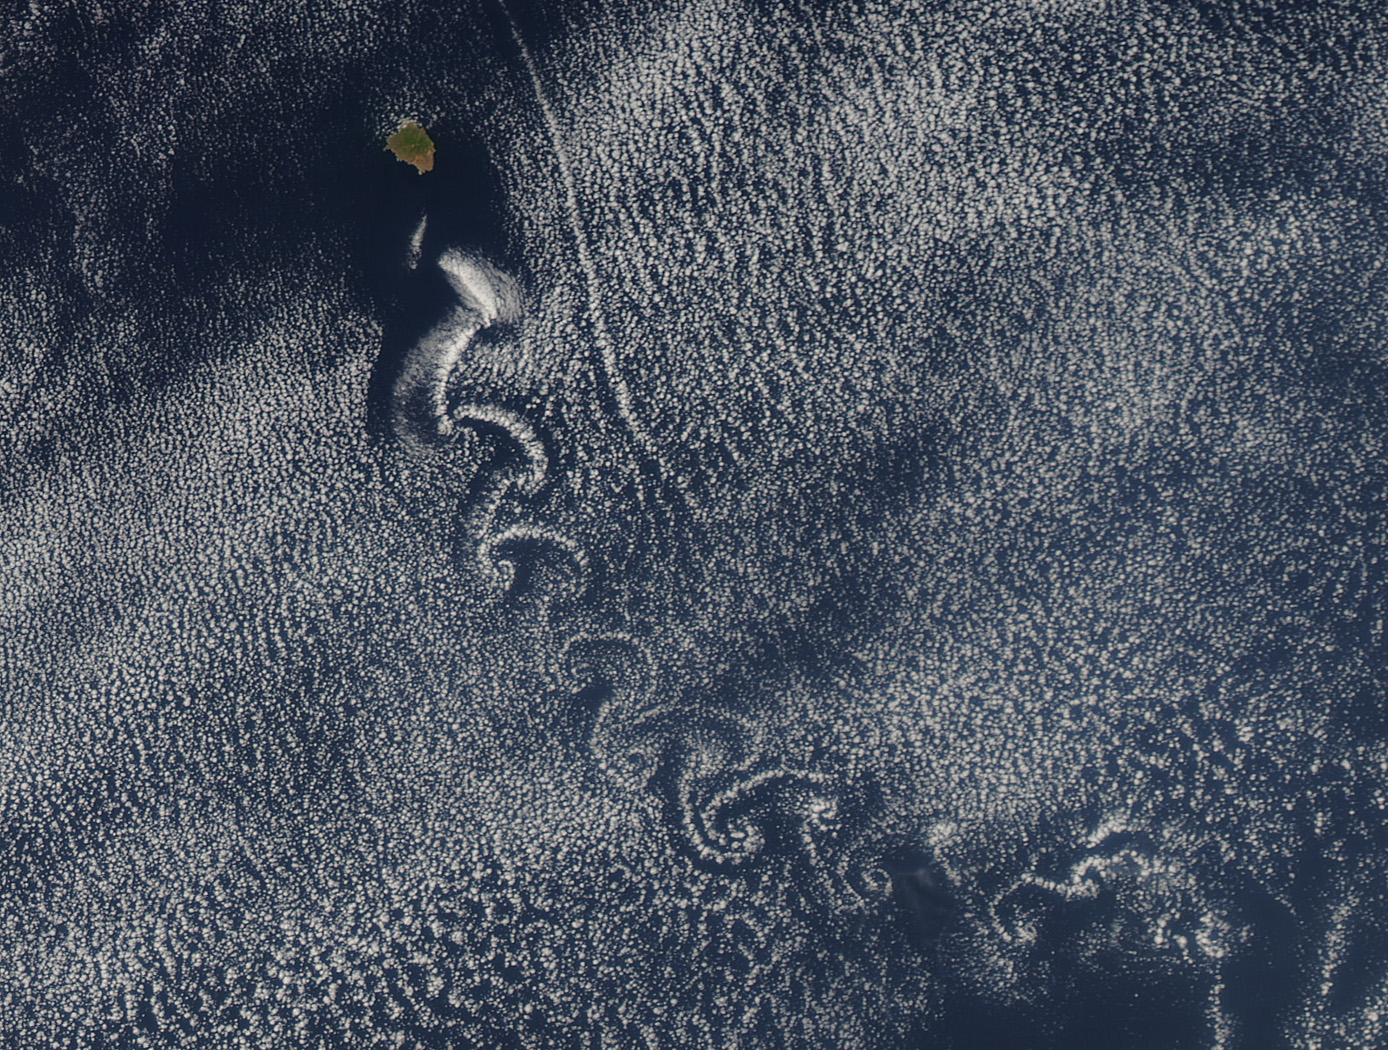 Swirl of Clouds over the Pacific; Credit: NASA Earth Observatory